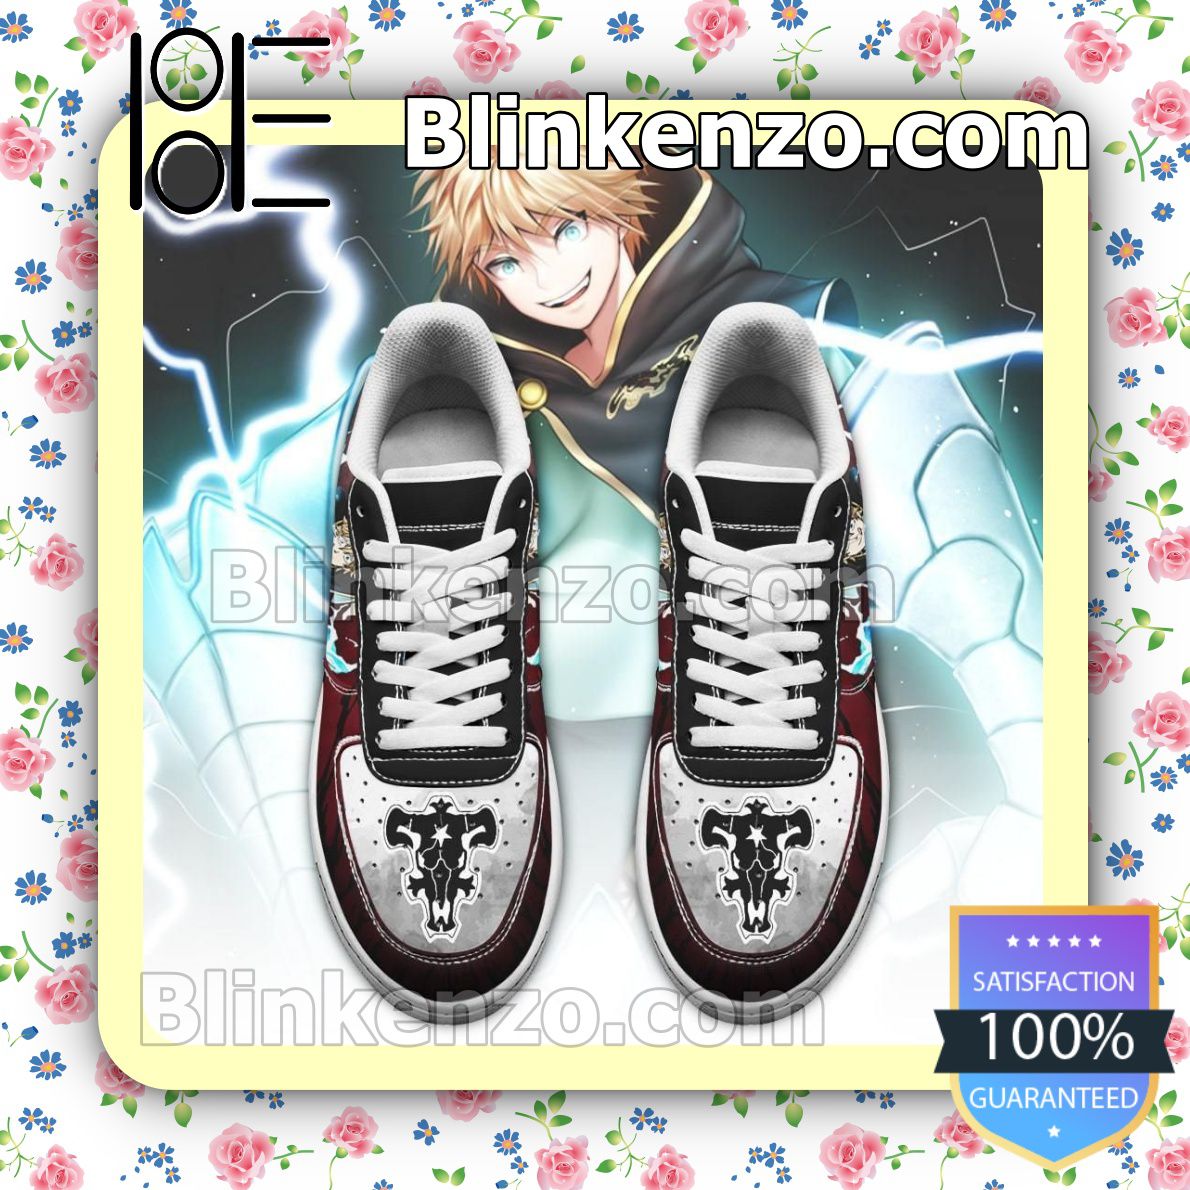 Perfect Luck Voltia Black Bull Knight Black Clover Anime Nike Air Force Sneakers